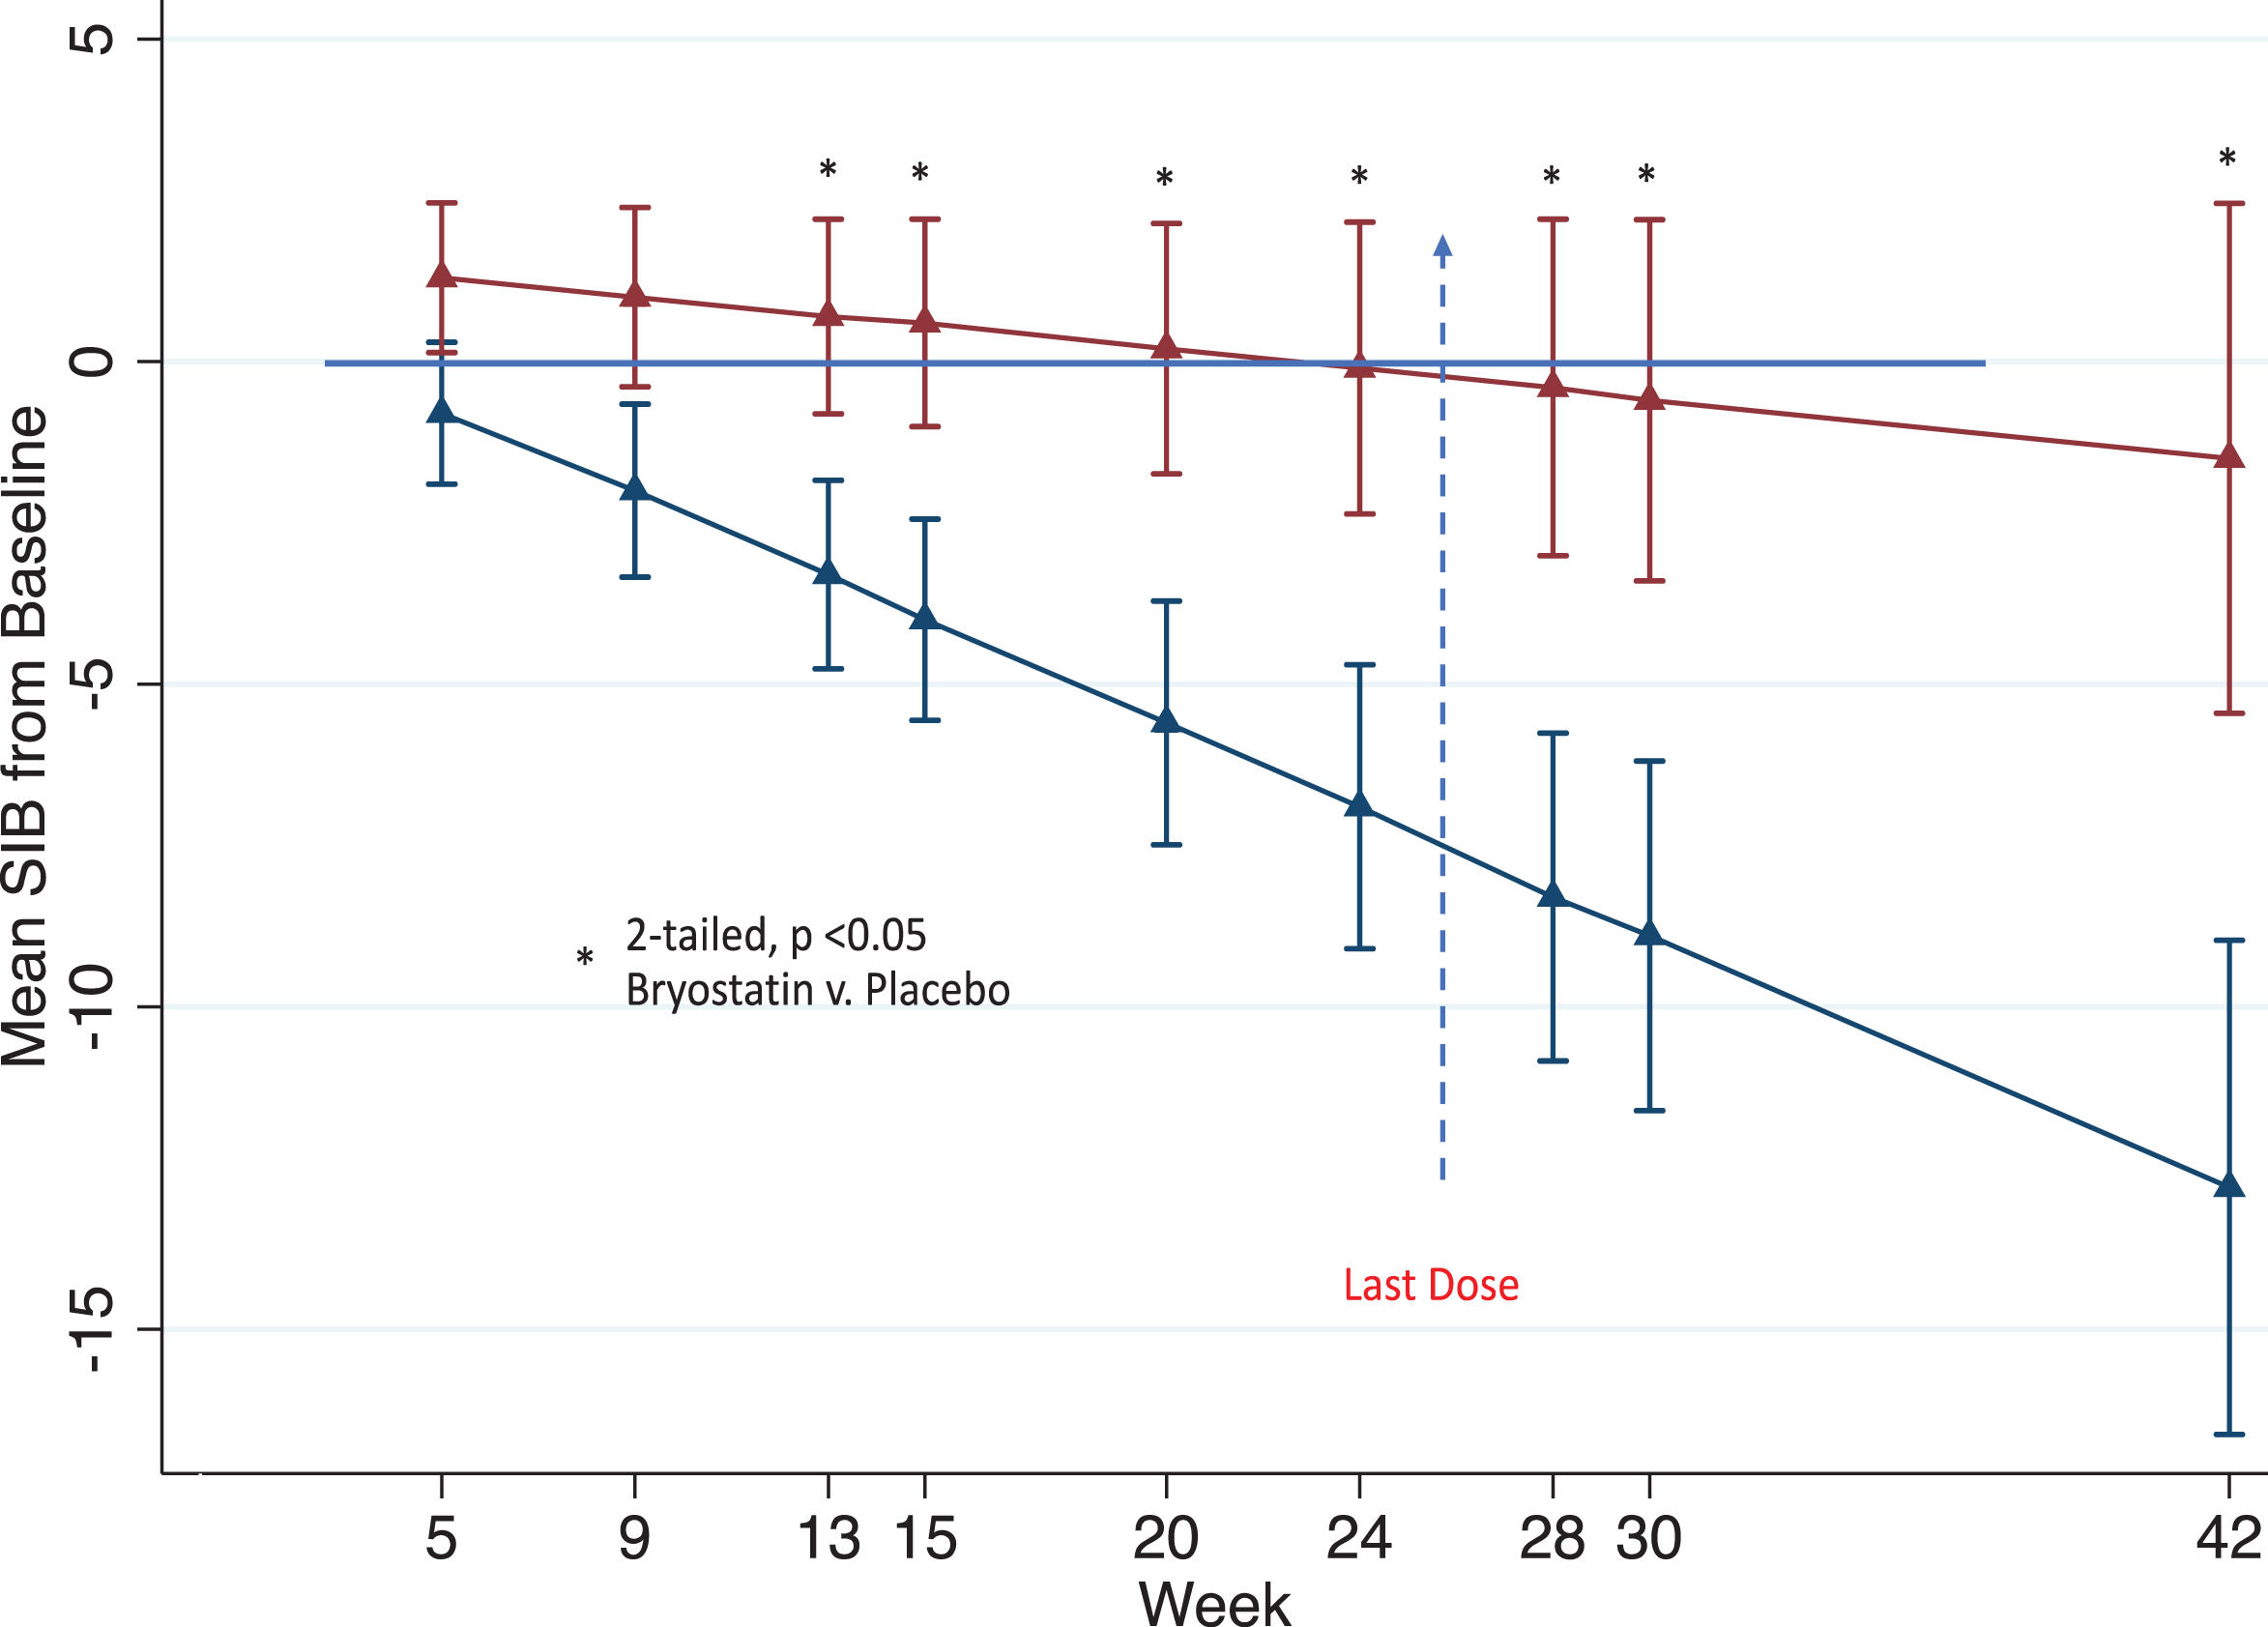 Expected mean (±se) differences in SIB from baseline for patients in the Moderately Severe 10-14 Cohort as obtained by the MMRM model for all time point assessments; placebo (blue) and Bryostatin (red).